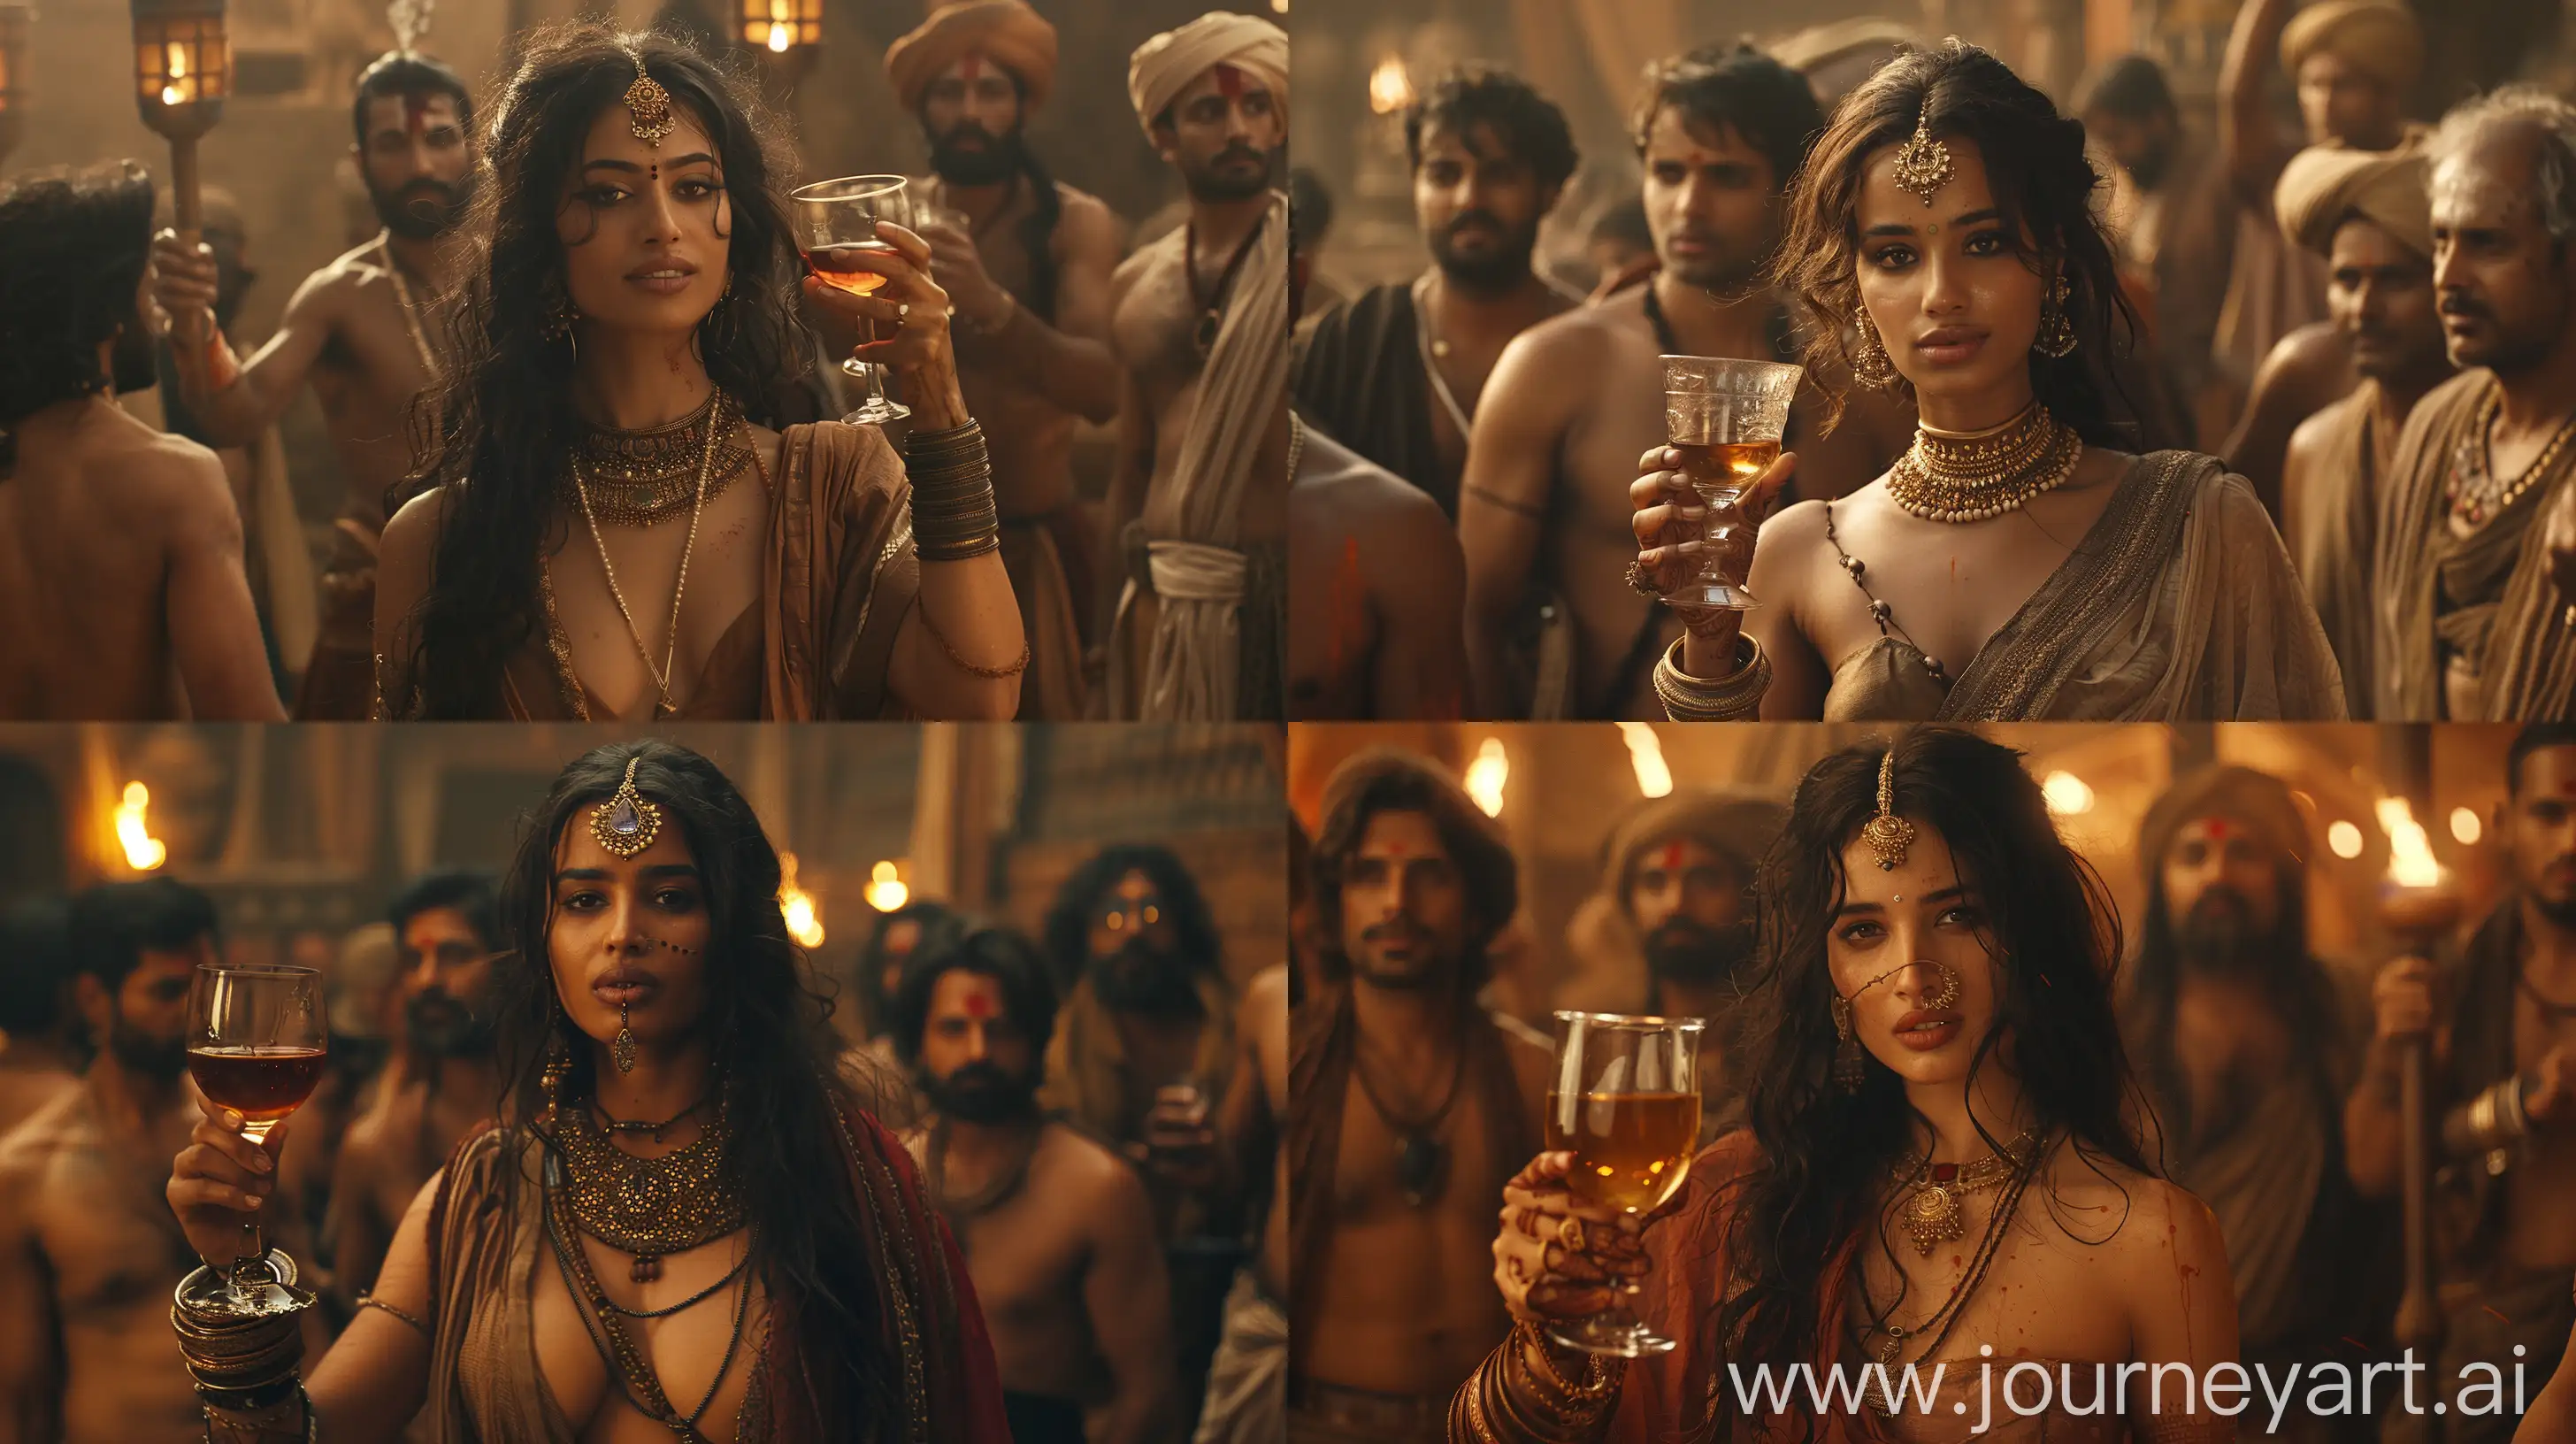 Indian woman from ancient times holding a glass full of wine, drunk, amidst a group of men, brown toned image in dim ambient lighting, intricate details, high resolution image --s 400 --ar 16:9 --v 6